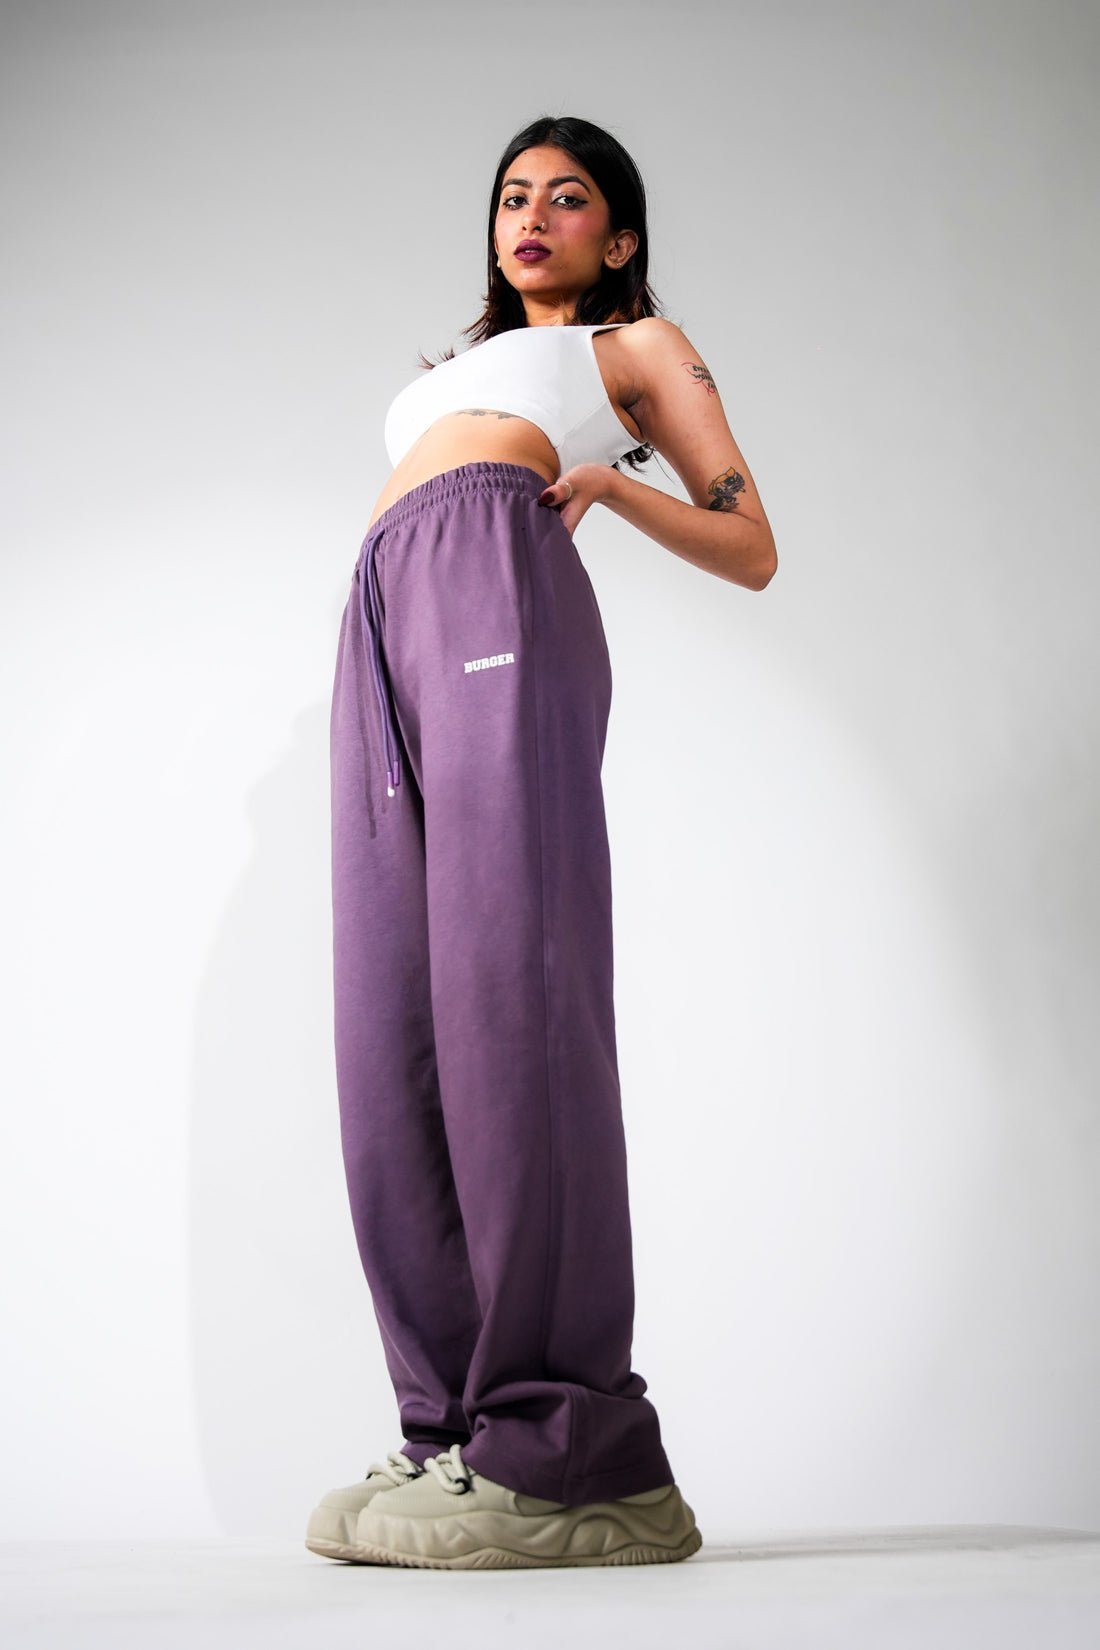 Joggers & Track Pants in the color purple for Women on sale